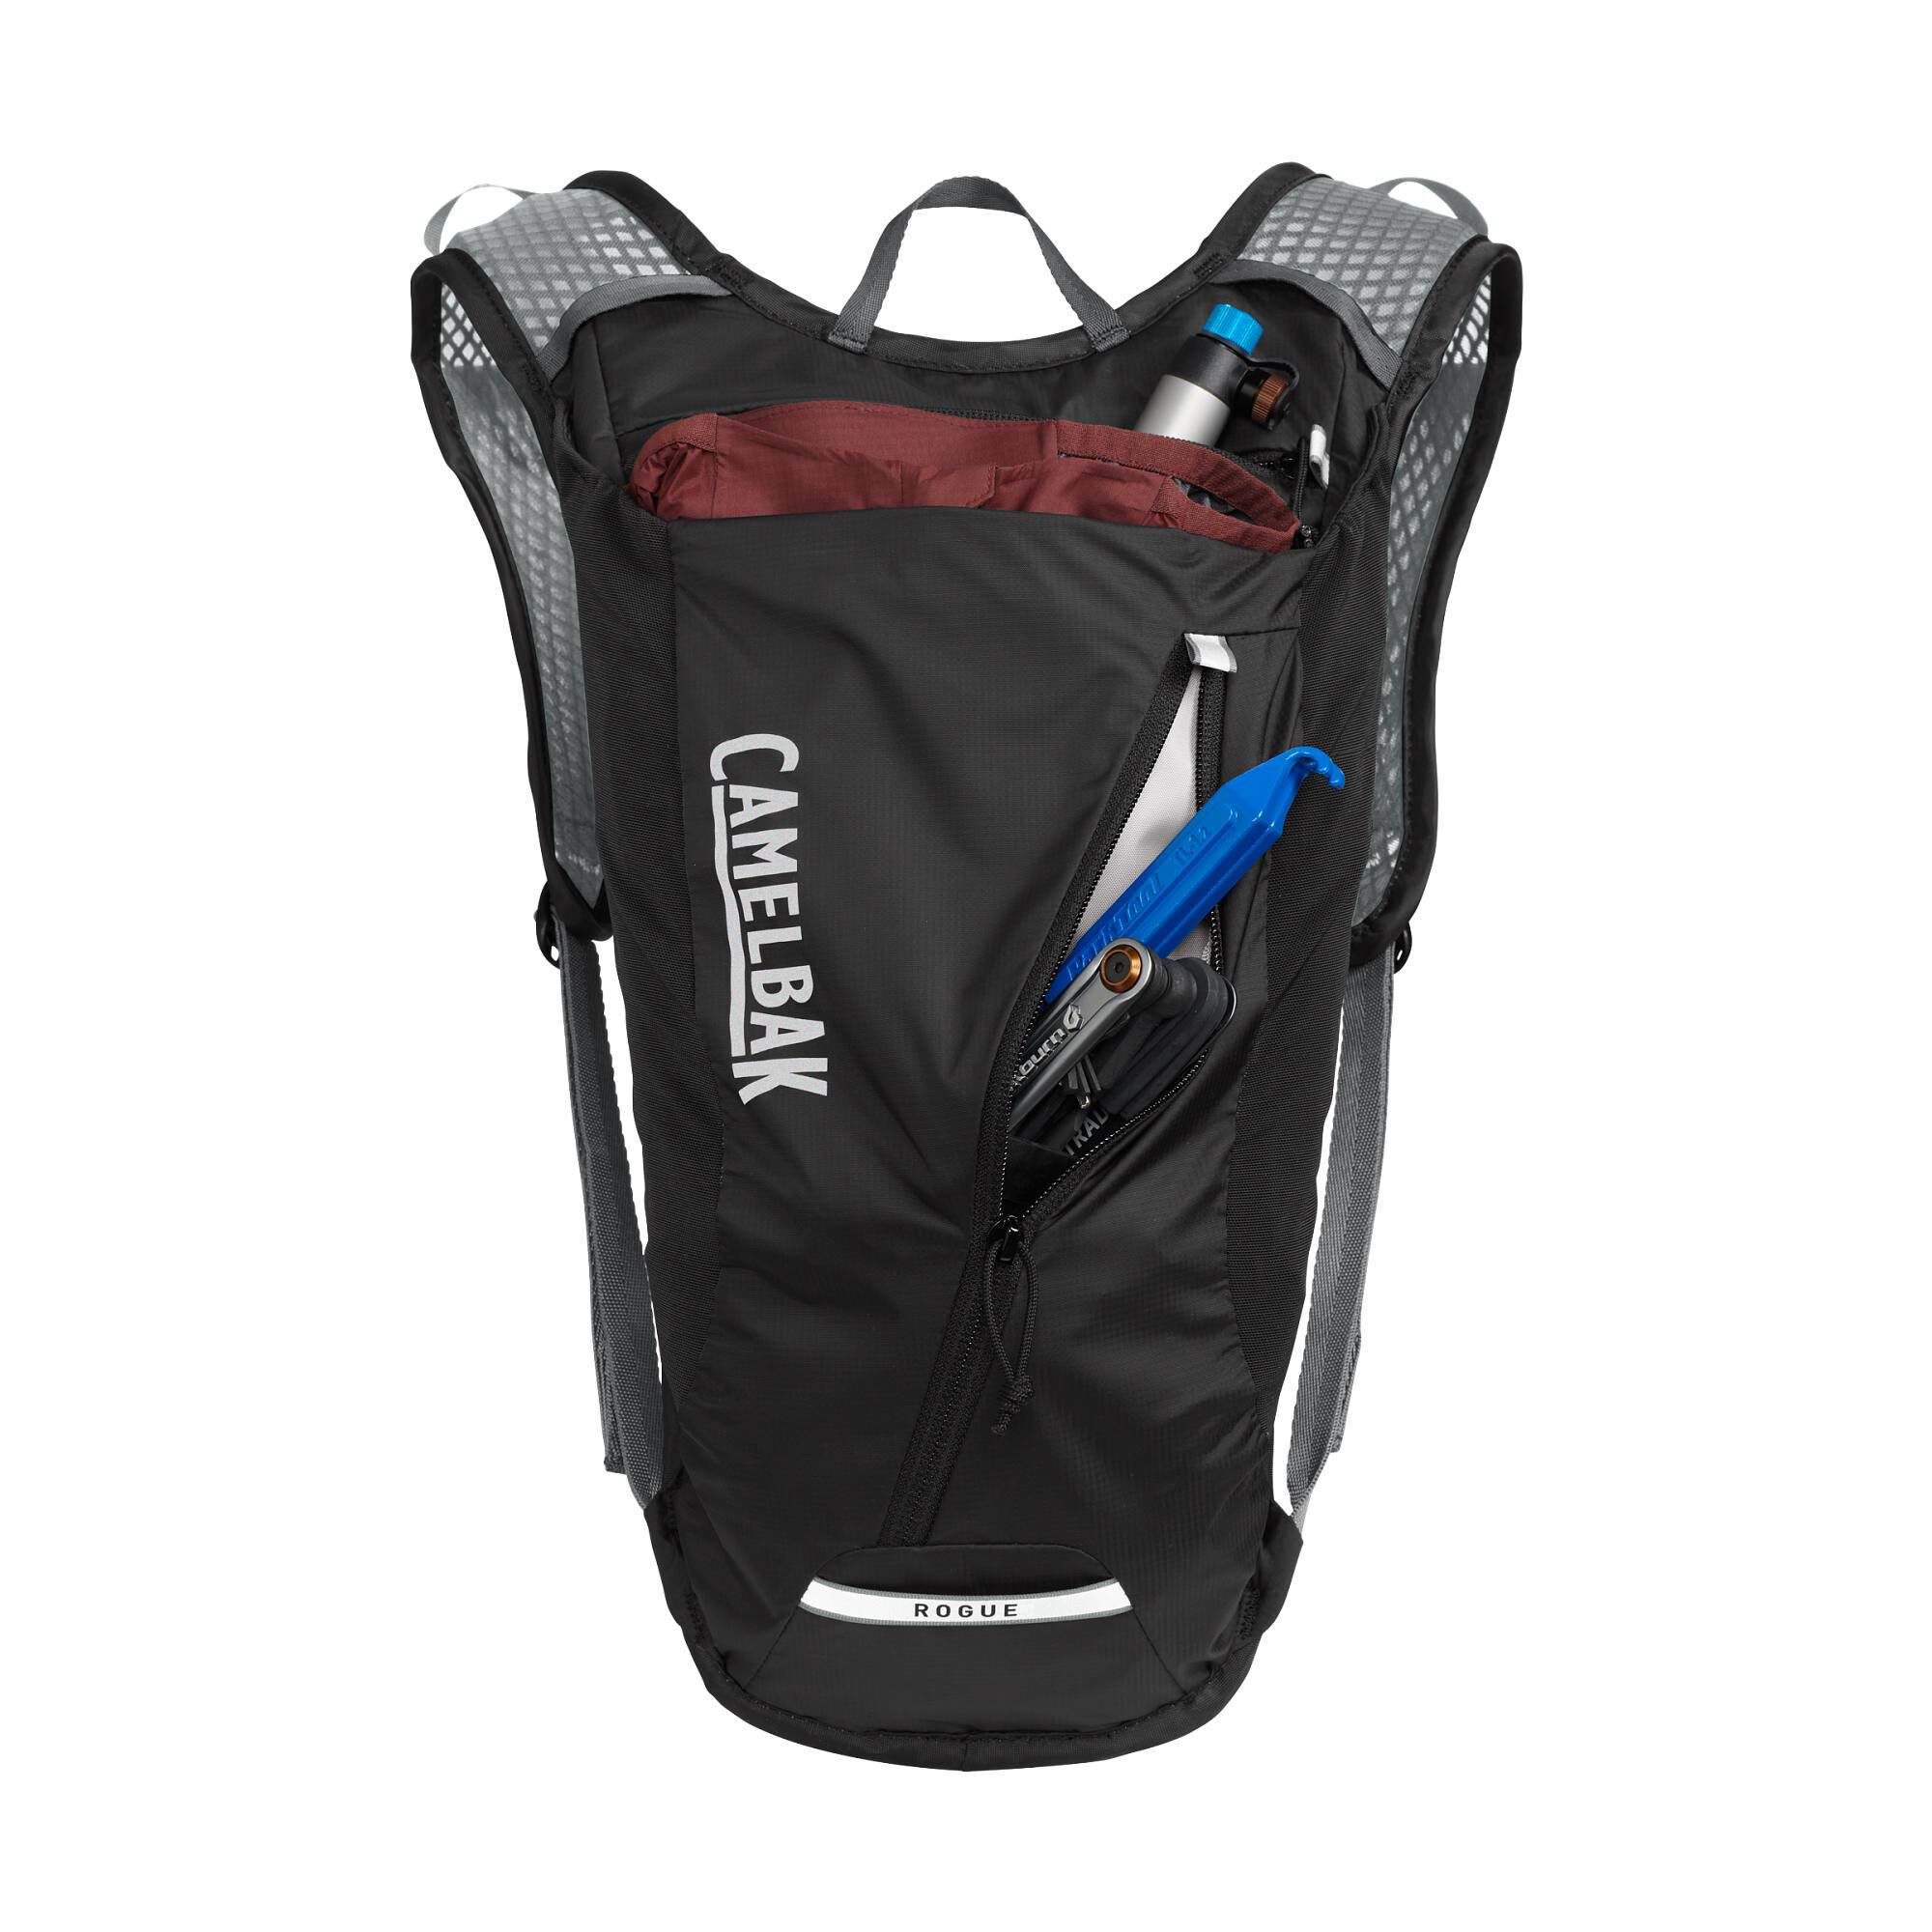 Rogue™ Light 7 Bike Hydration Pack with Crux® 2L Reservoir